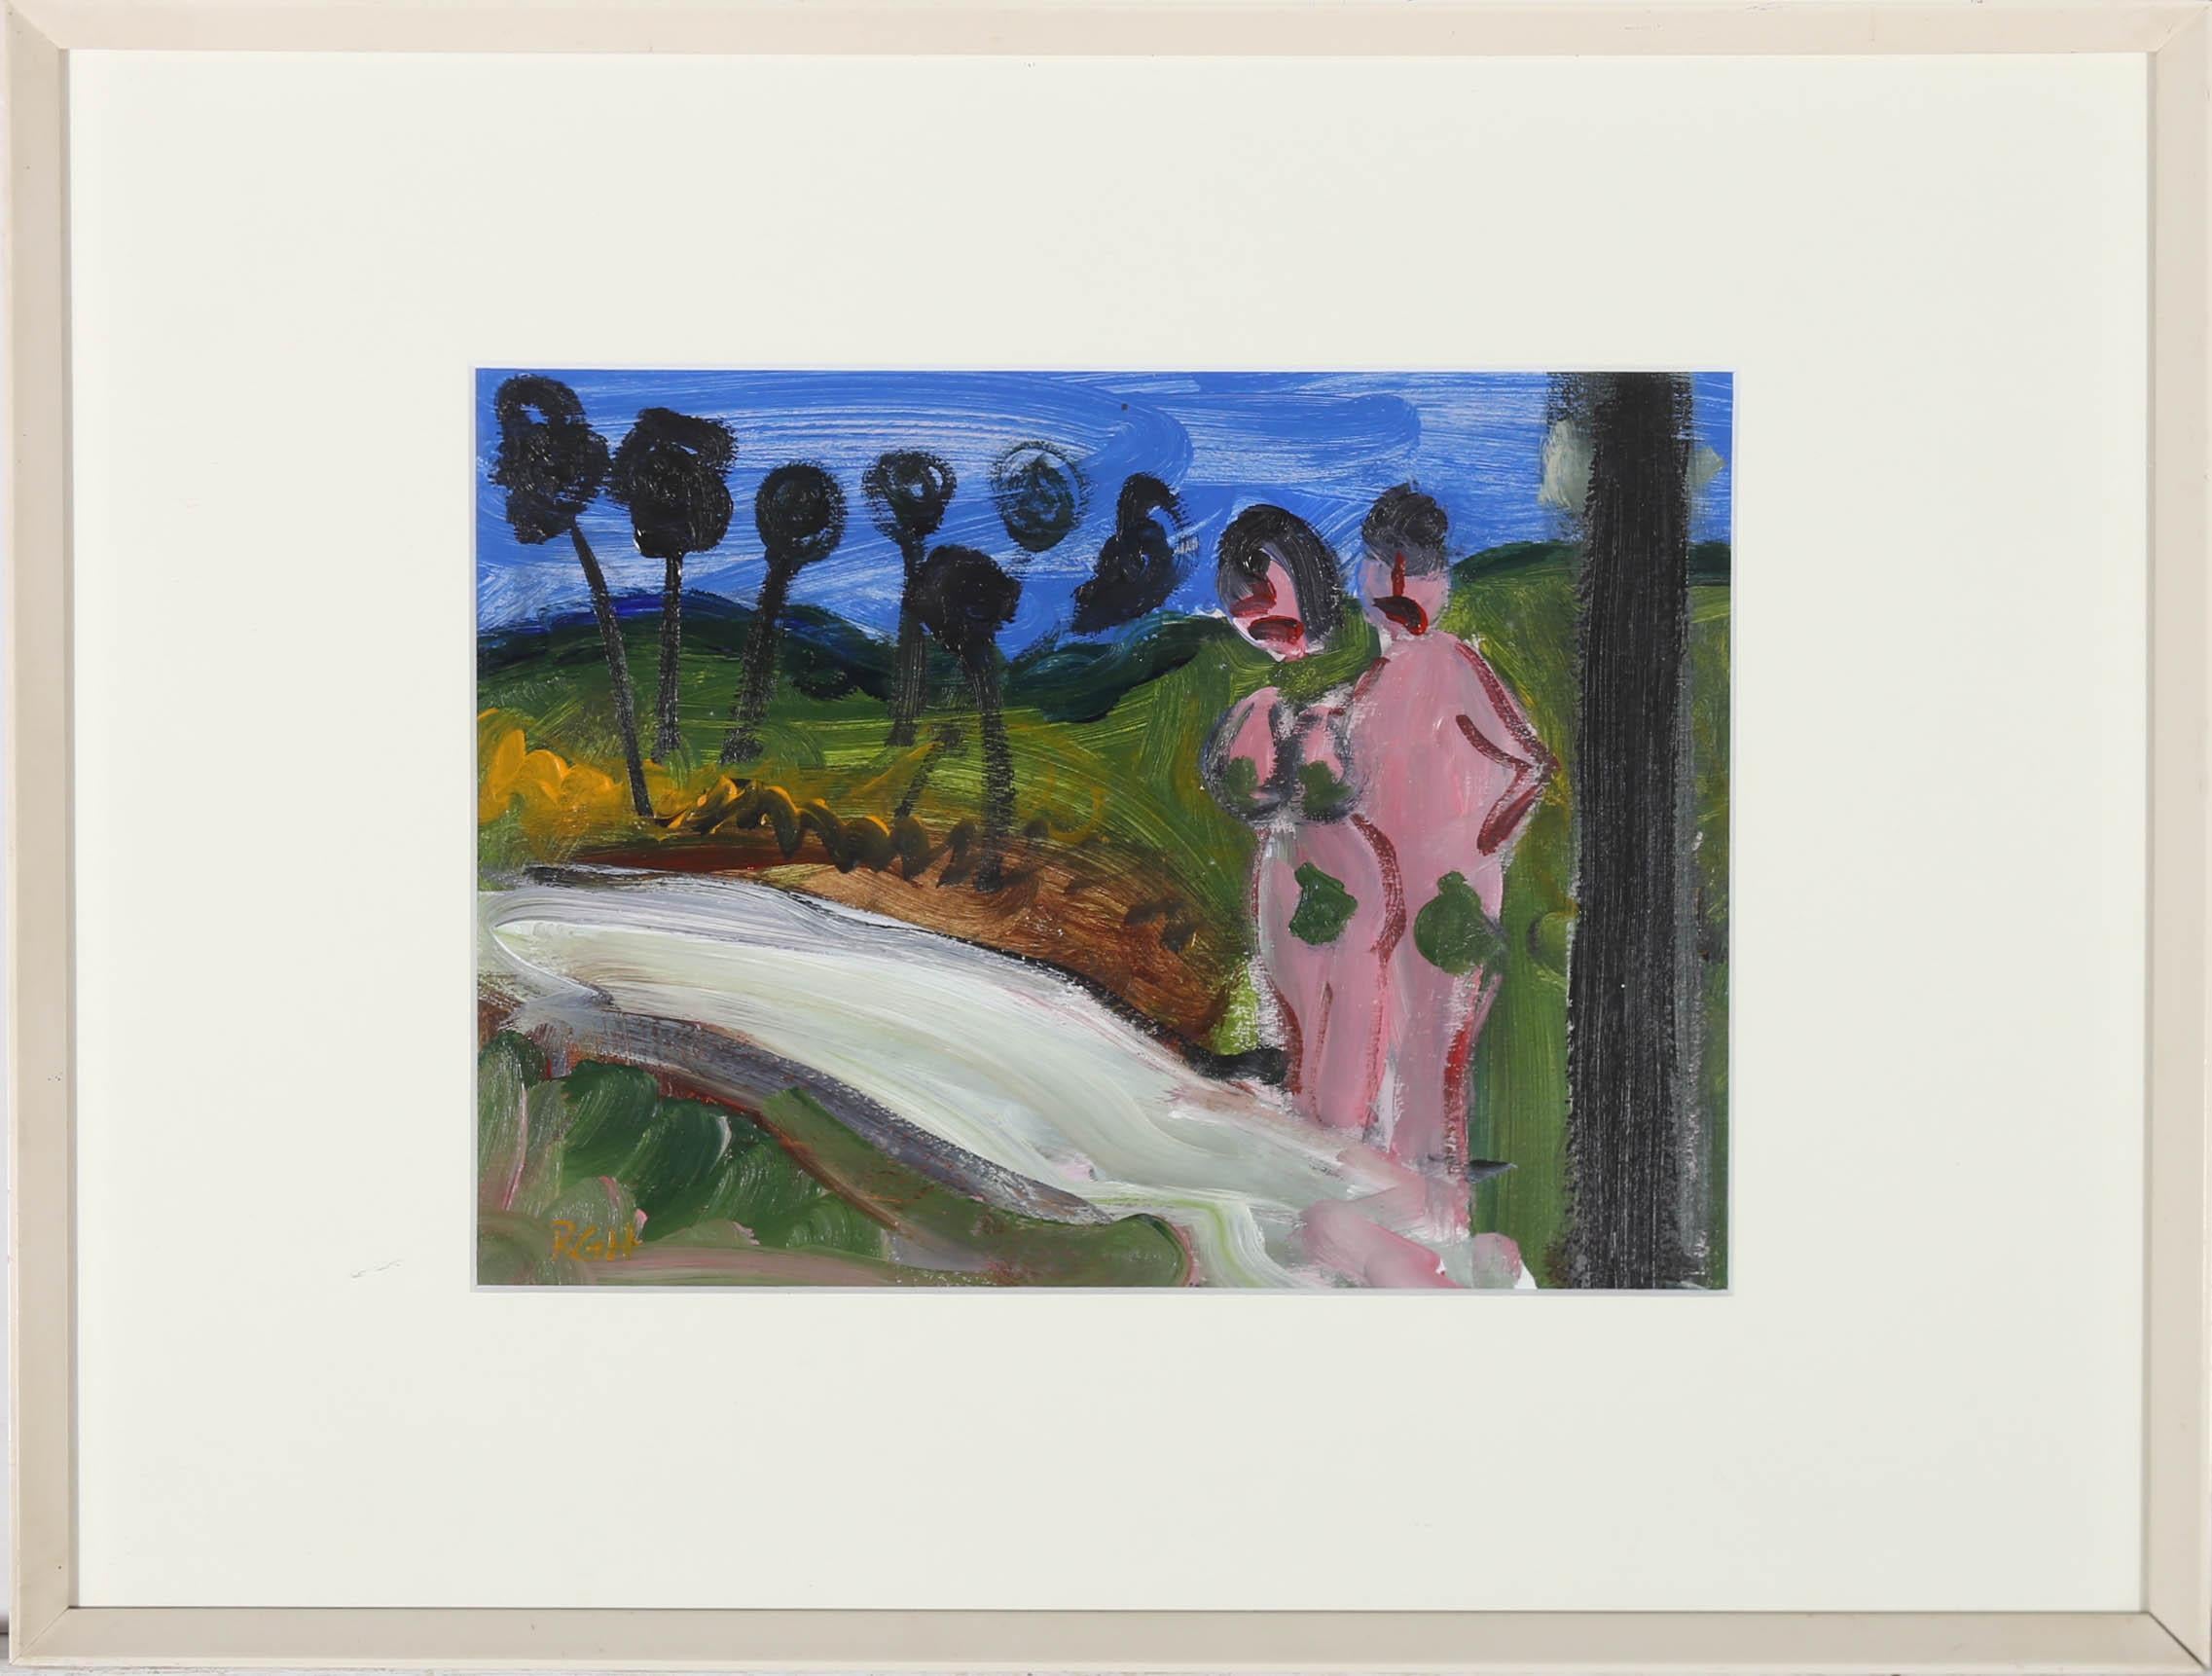 A light-hearted interpretation of the story of Adam and Eve, who find themselves in a vast landscape. The artist has attached a humorous inscription to the reverse reading: 'Less of the poor mouth, it's not as if I didn't make enough trees! Trees